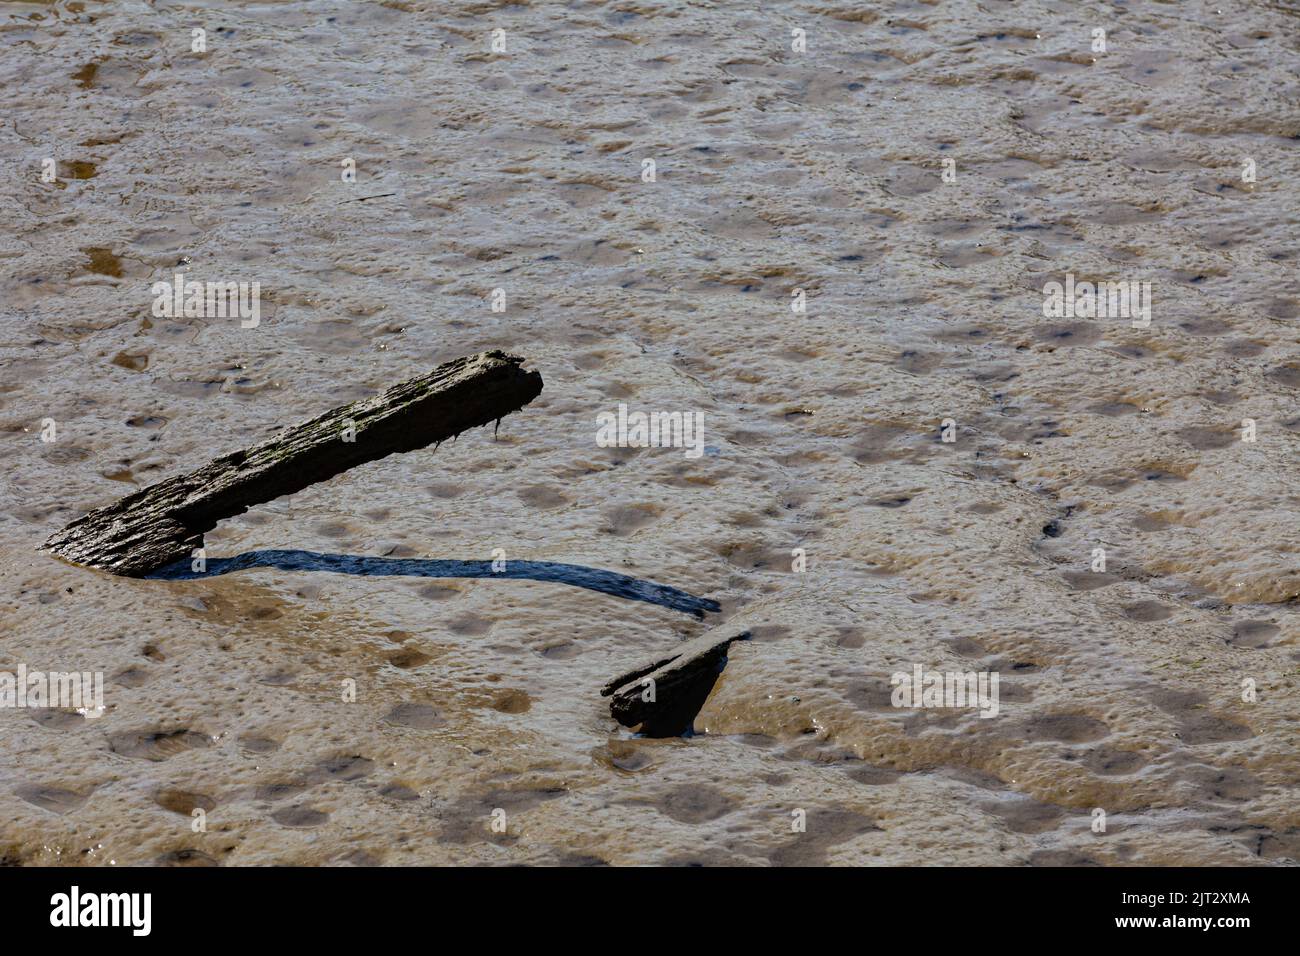 Abstract image of rotting wood protruding from a mudflat at low tide in Steveston British Columbia Canada Stock Photo